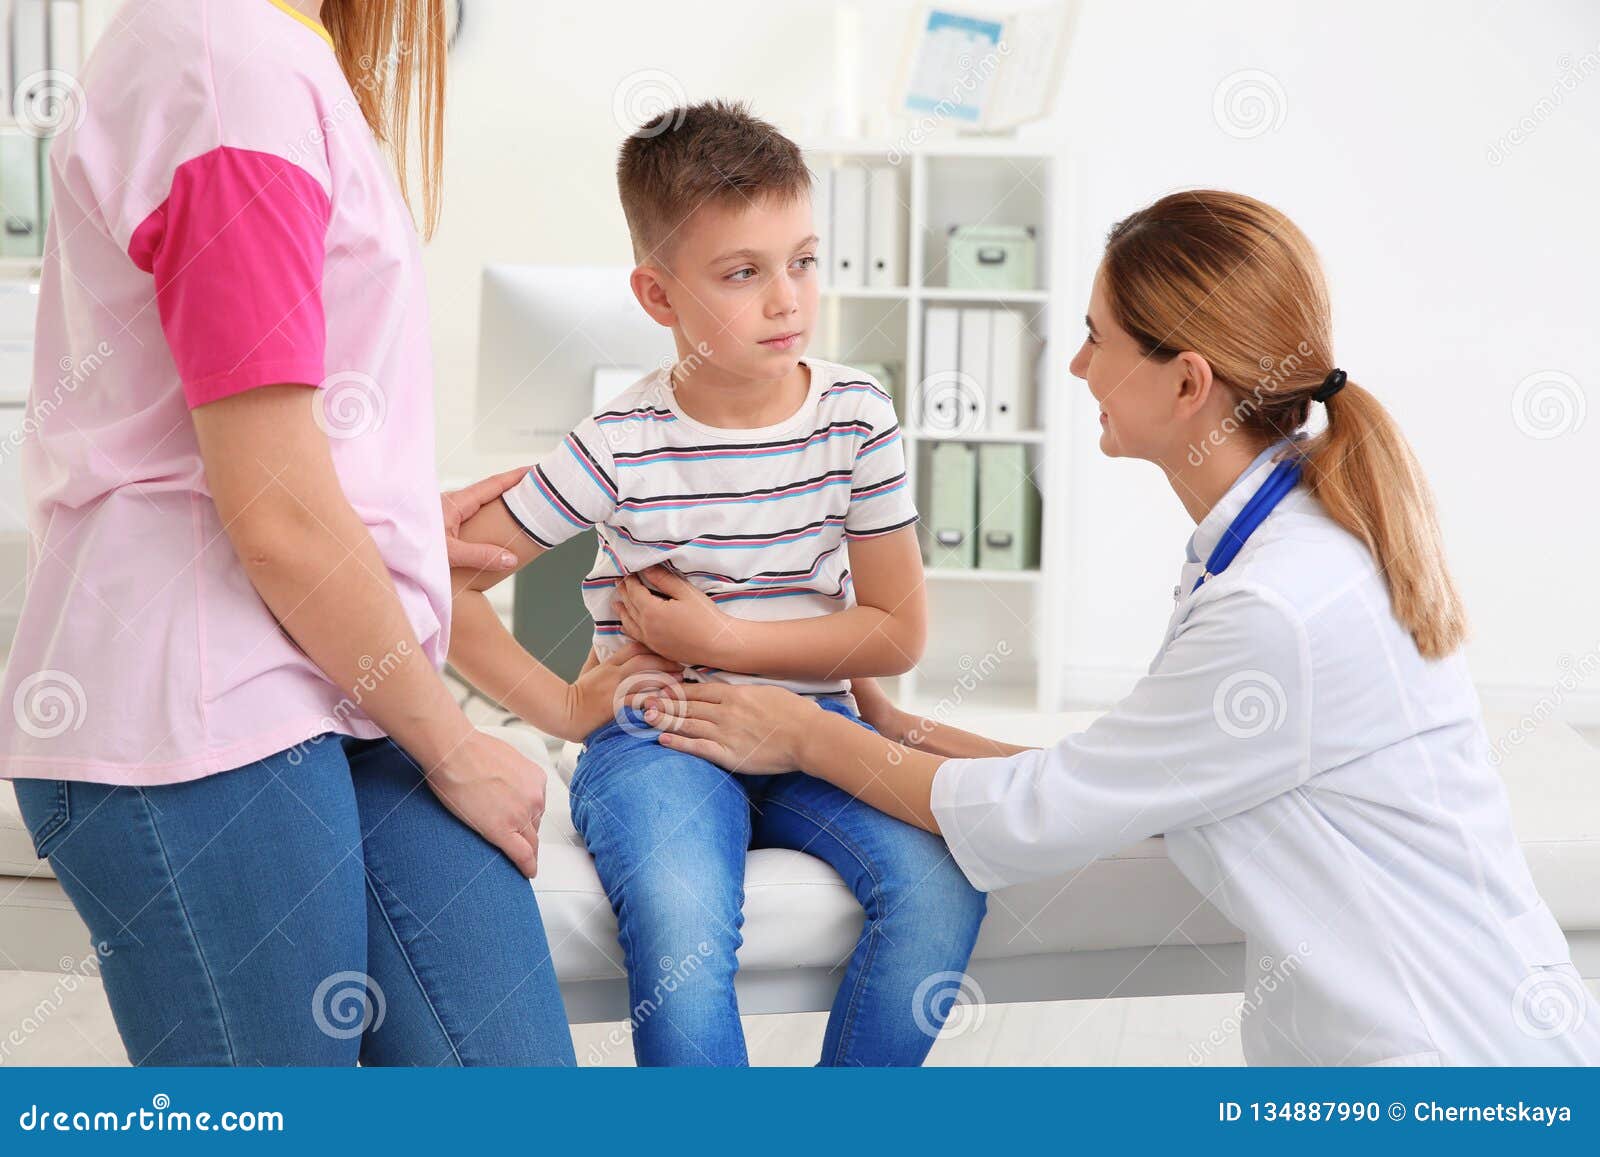 Mother and son visiting pediatrician. Doctor working with patient in hospital